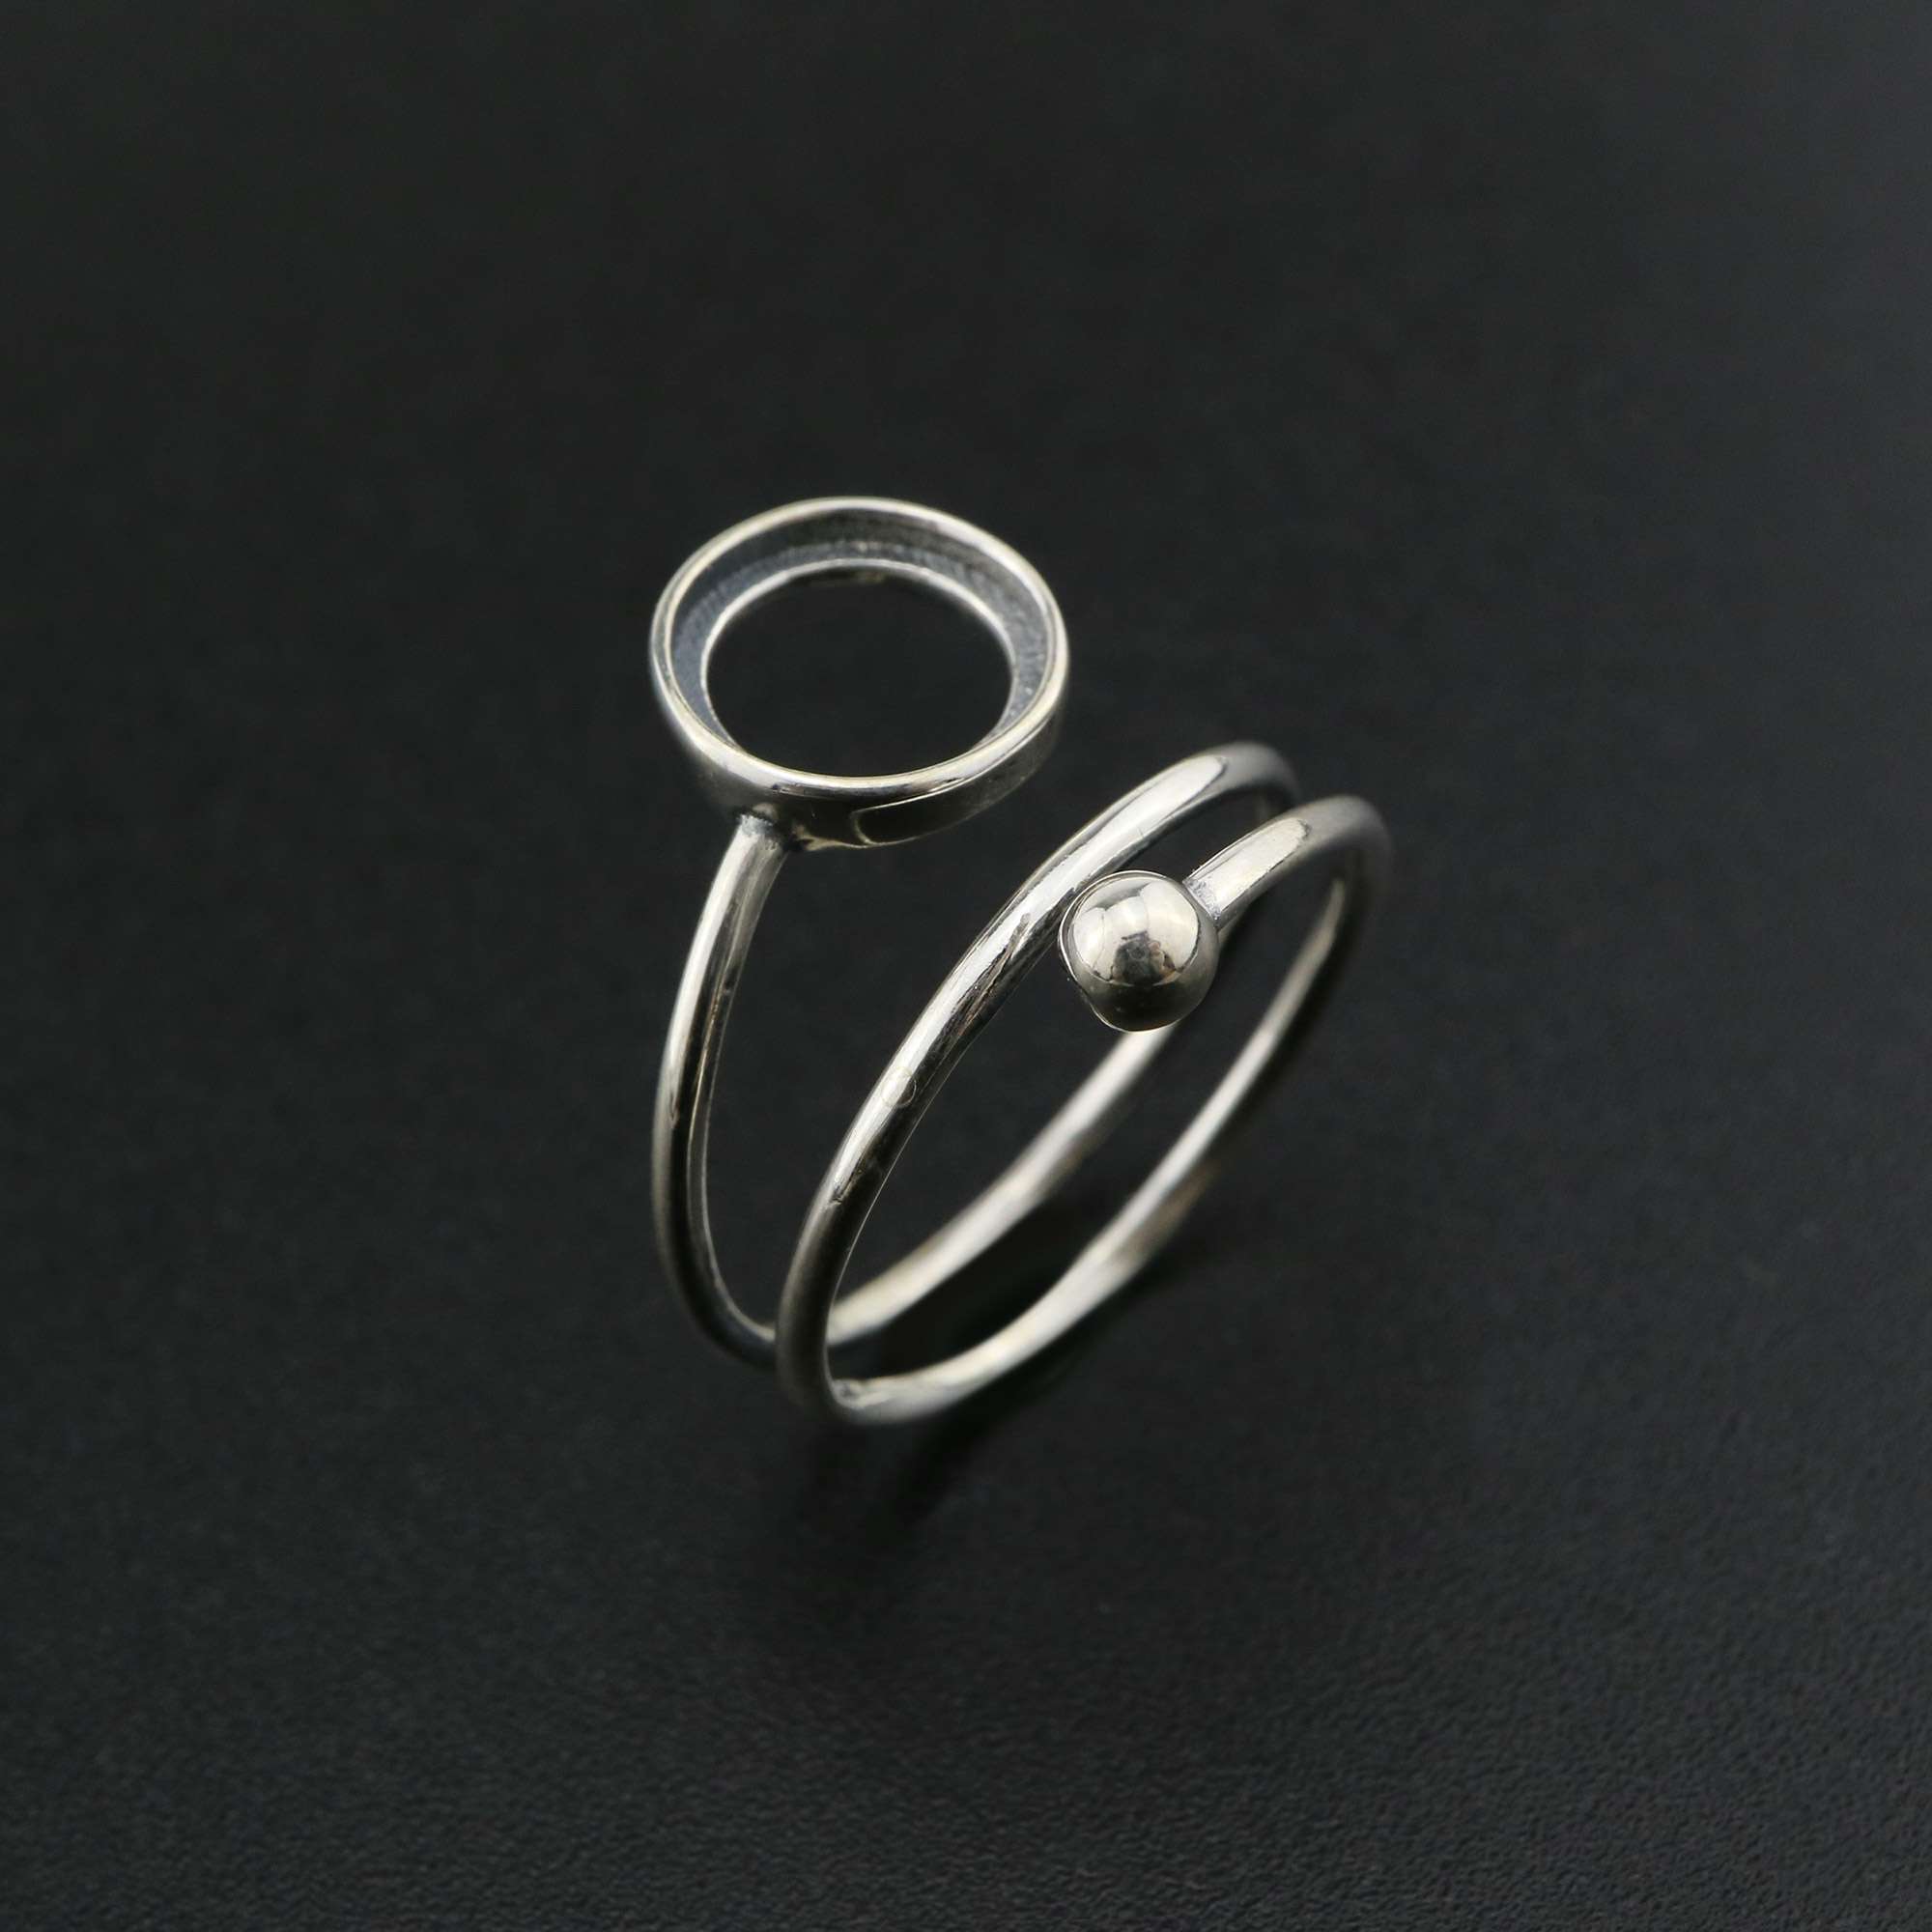 1Pcs 8MM Round Ring Settings US Size 6 for Cabochon Stone Solid 925 Sterling Silver DIY Bezel Tray Supplies 1212067 - Click Image to Close